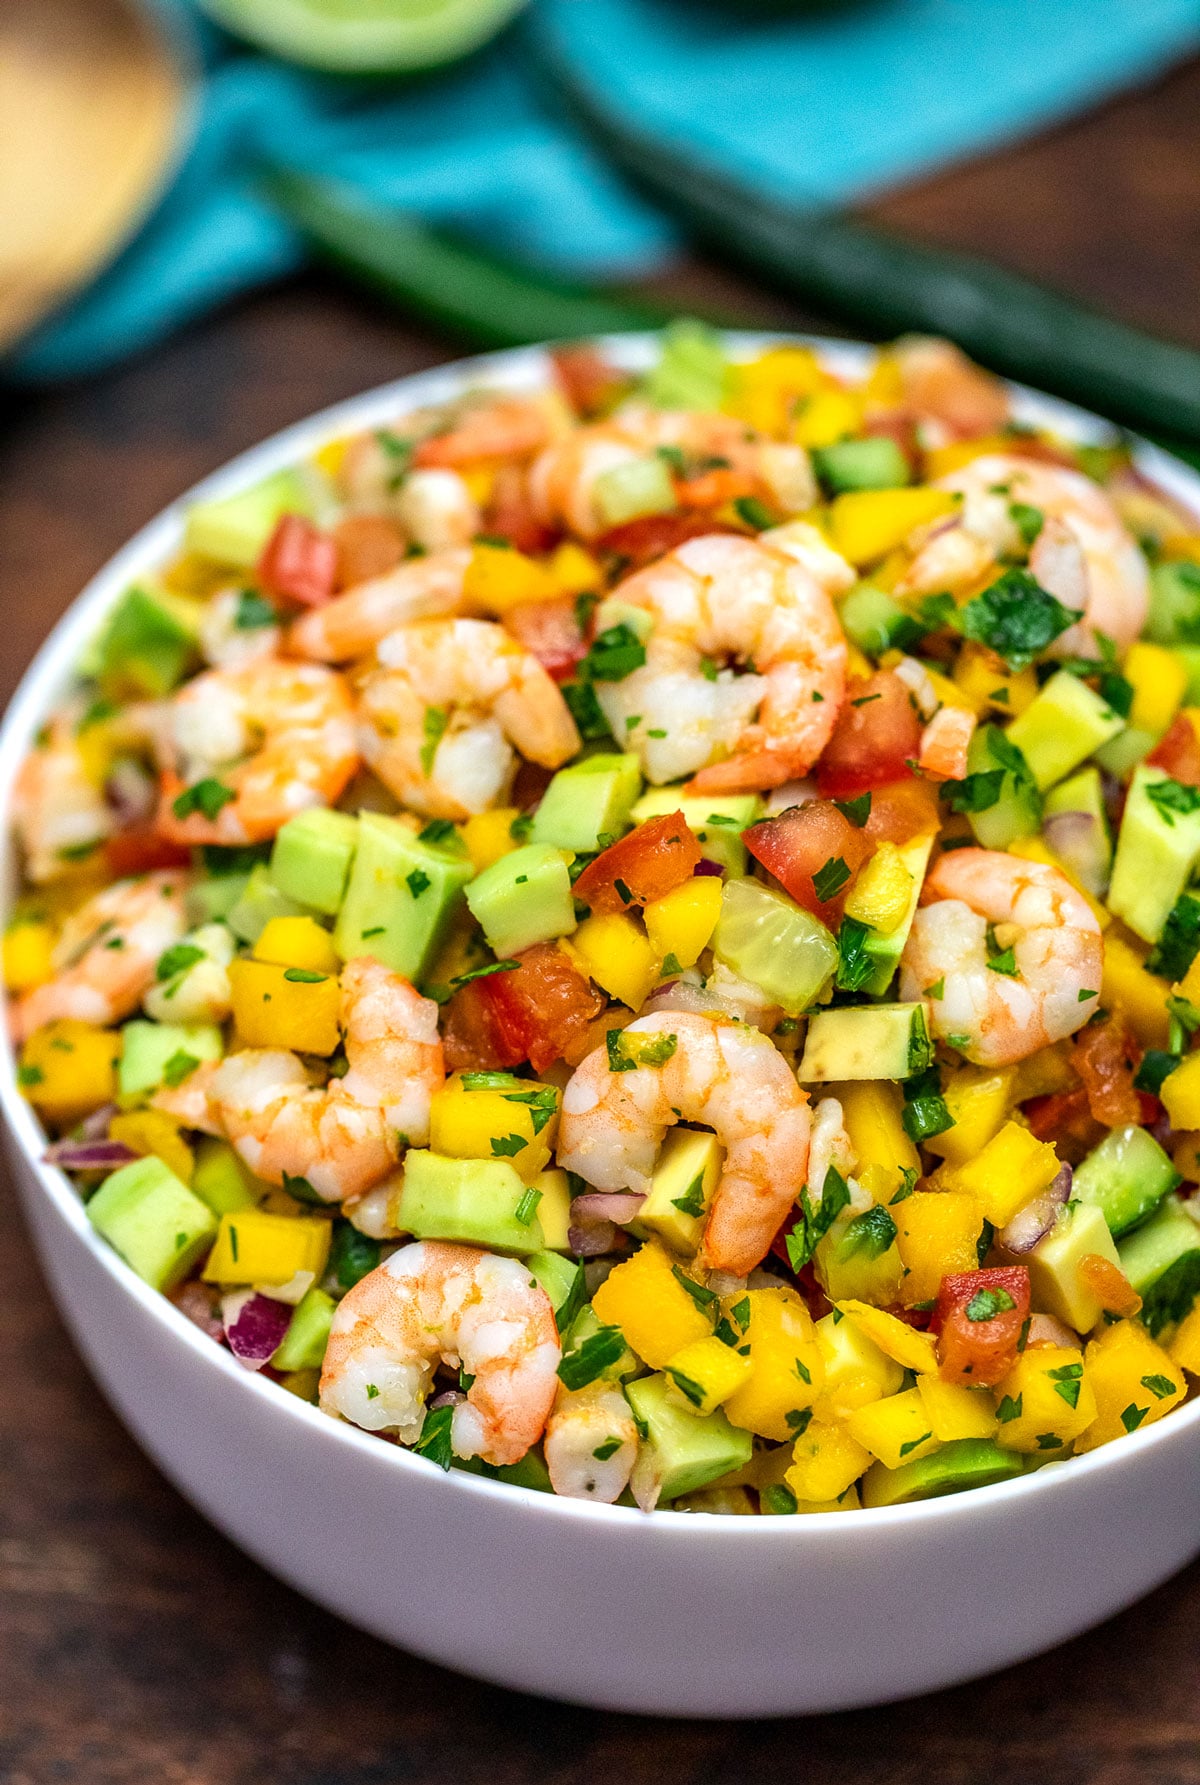 Best Shrimp Ceviche Recipe Video Sweet And Savory Meals I love it served as an appetizer or for a light meal. shrimp ceviche recipe